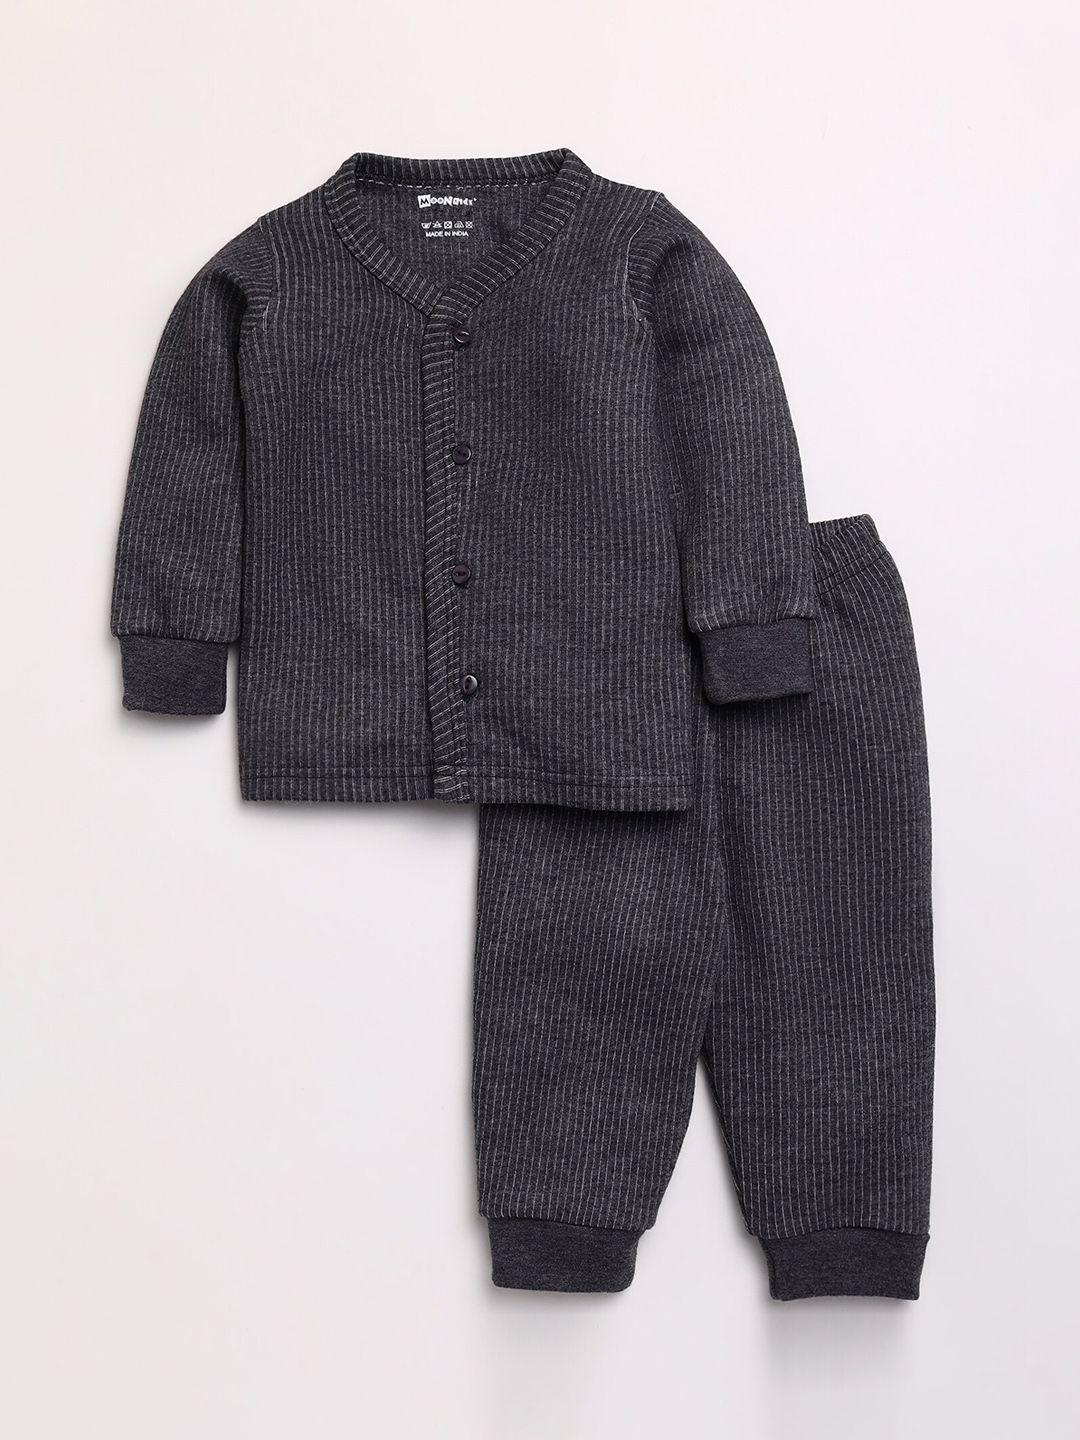 MooNKids Boys Grey Solid Thermal Set